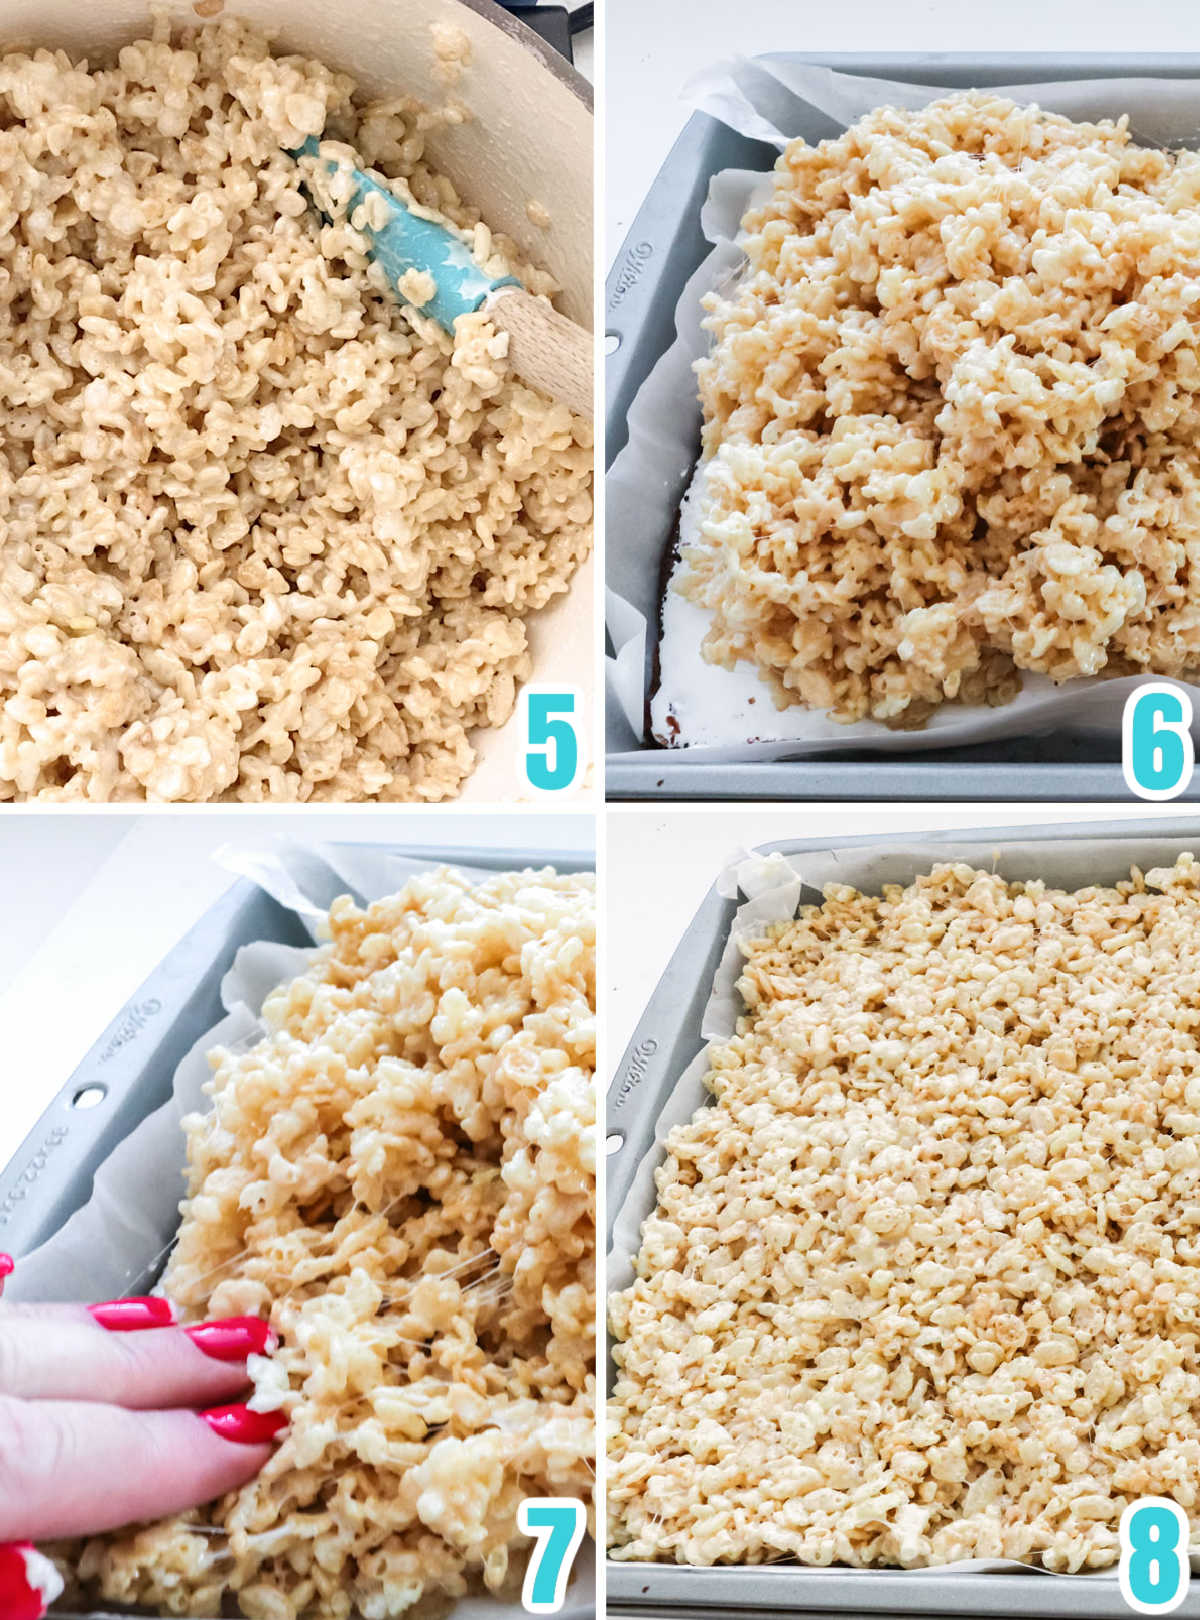 Collage image showing how to make the Rice Krispie Treat mixture and add it to the dessert bar.